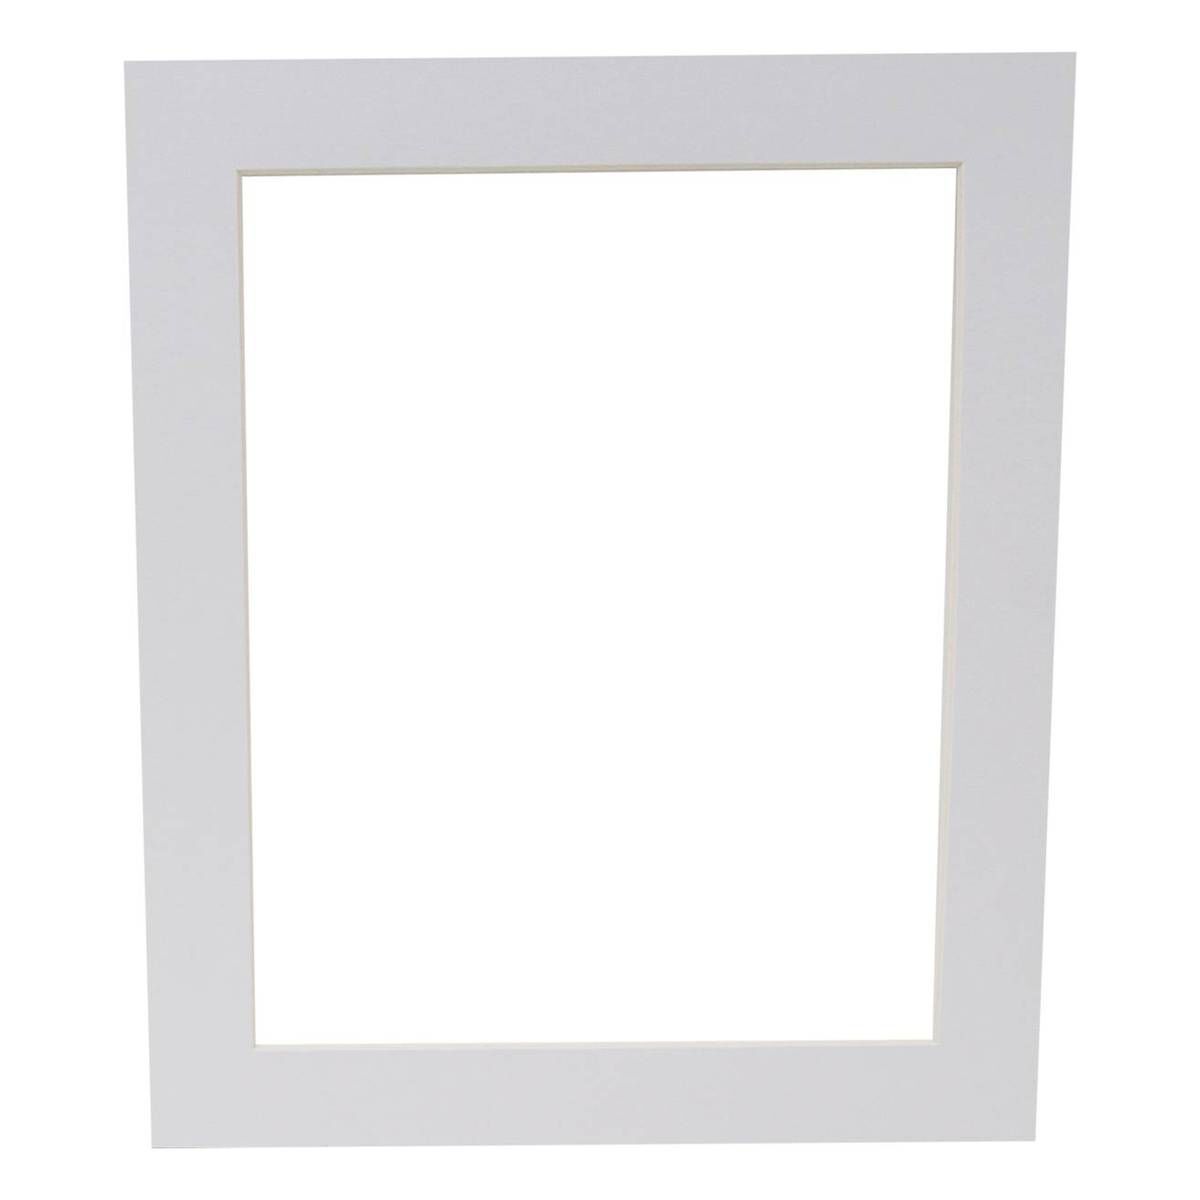 10 PACK 12 x 12 Inch White Mounts to fit 10 X 10 Photo & Pictures 